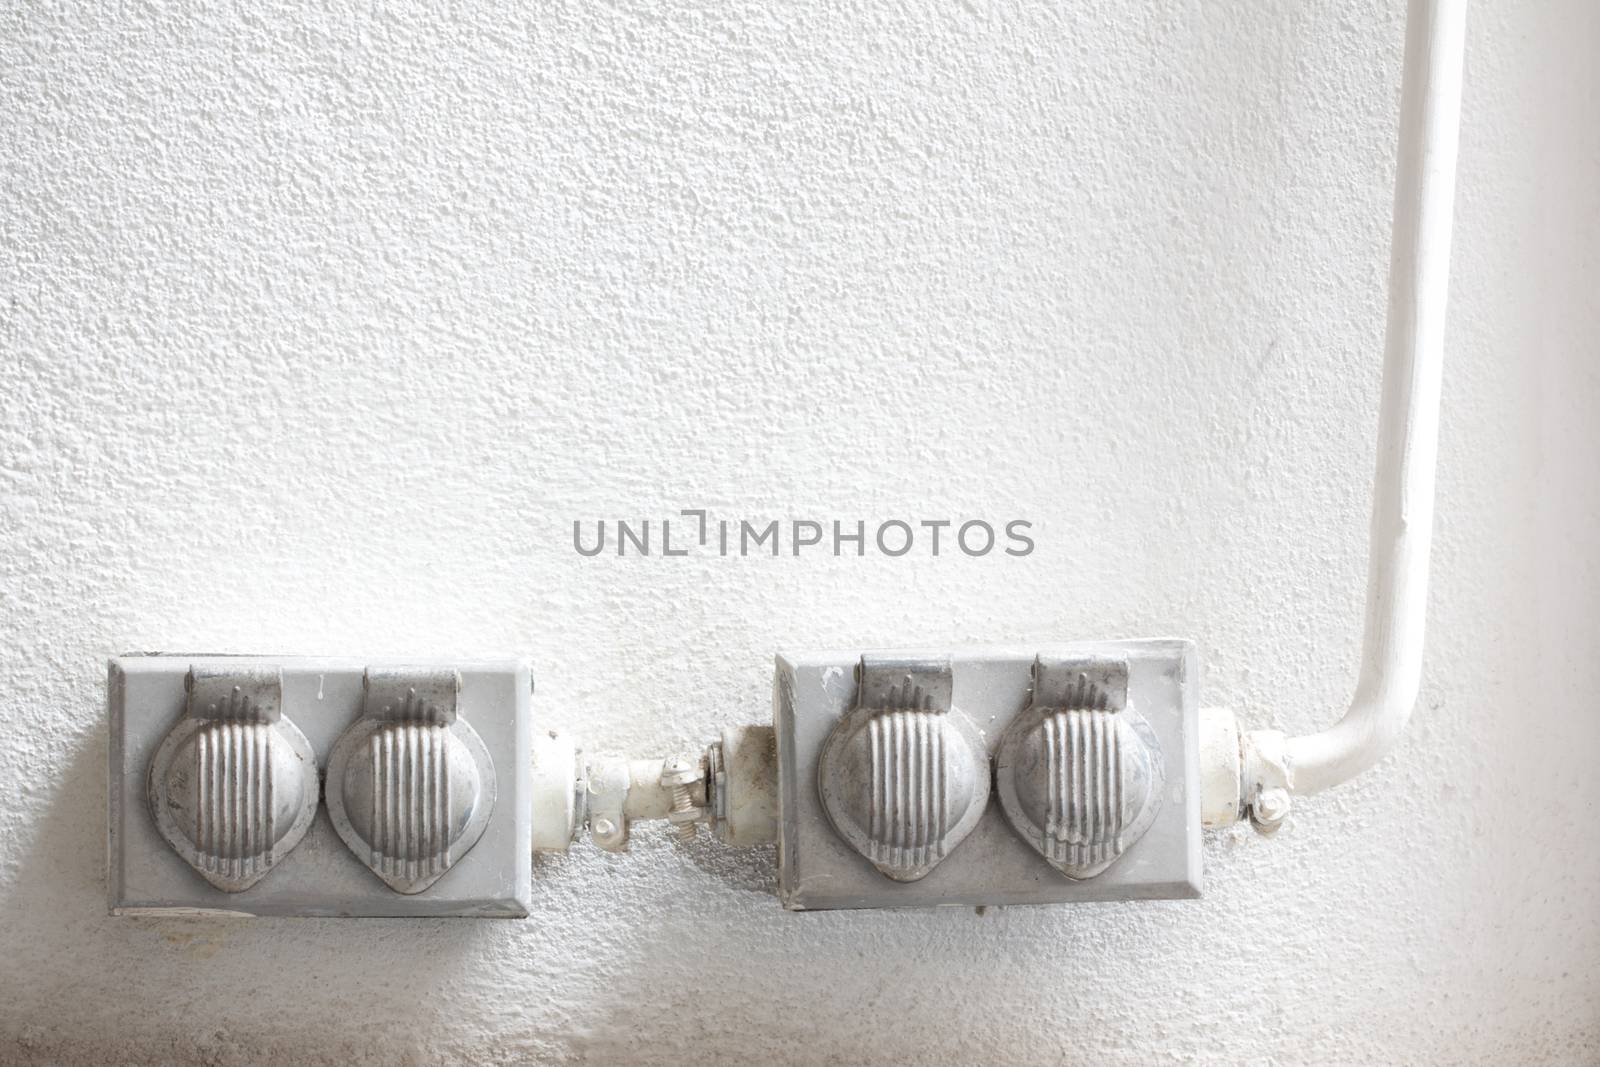 Old dirty electrical outlets  by wyoosumran